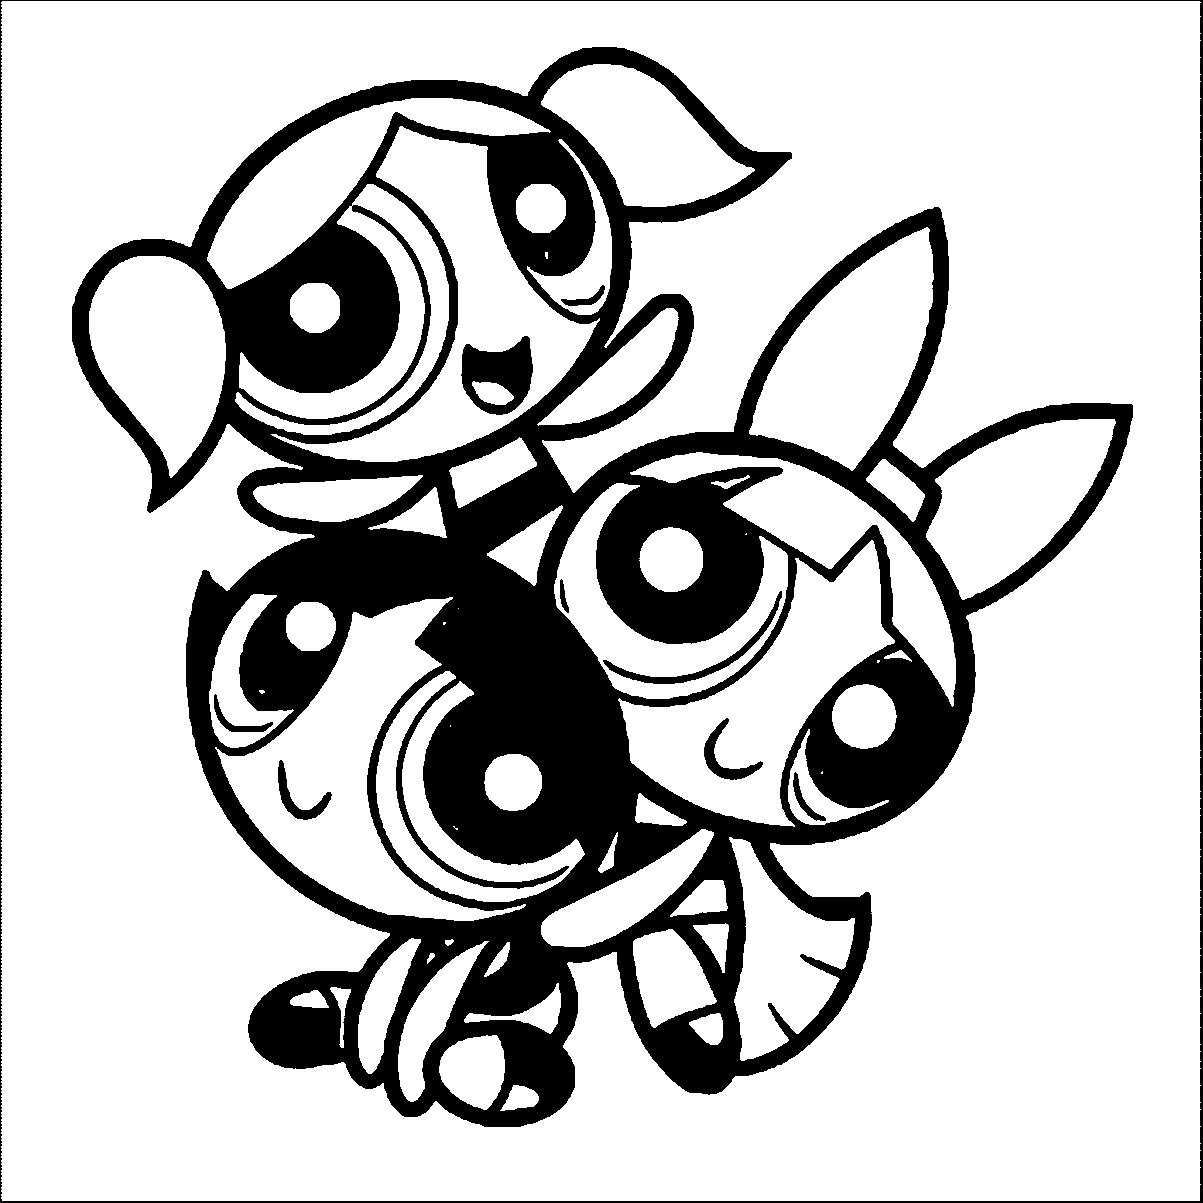 Cute Powerpuff Girls Coloring Page - Free Printable Coloring Pages for Kids